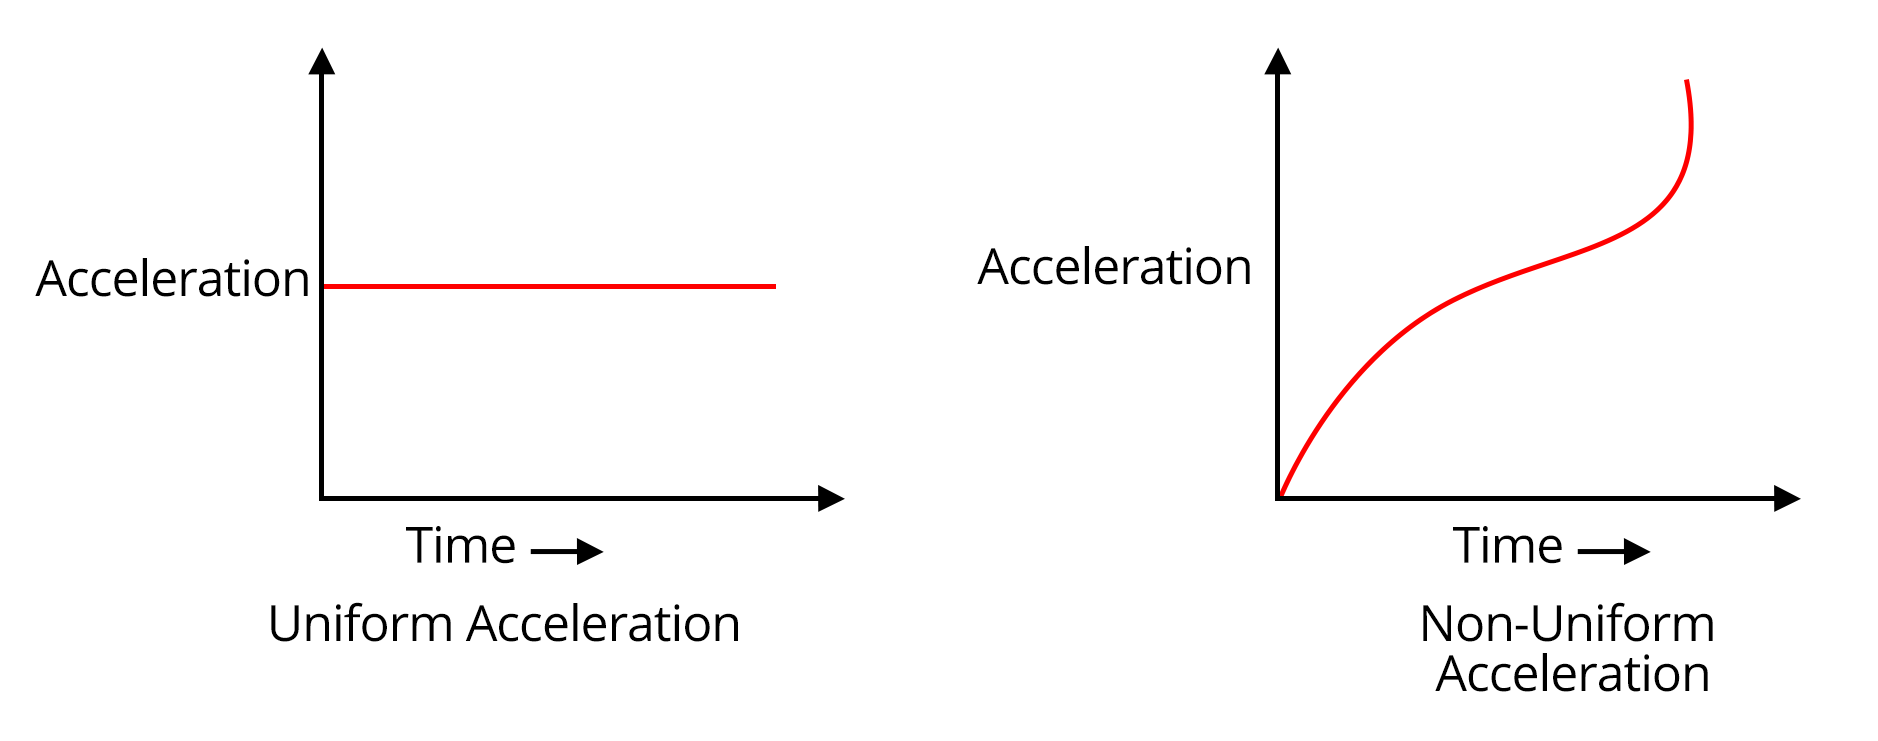 Acceleration-time graph